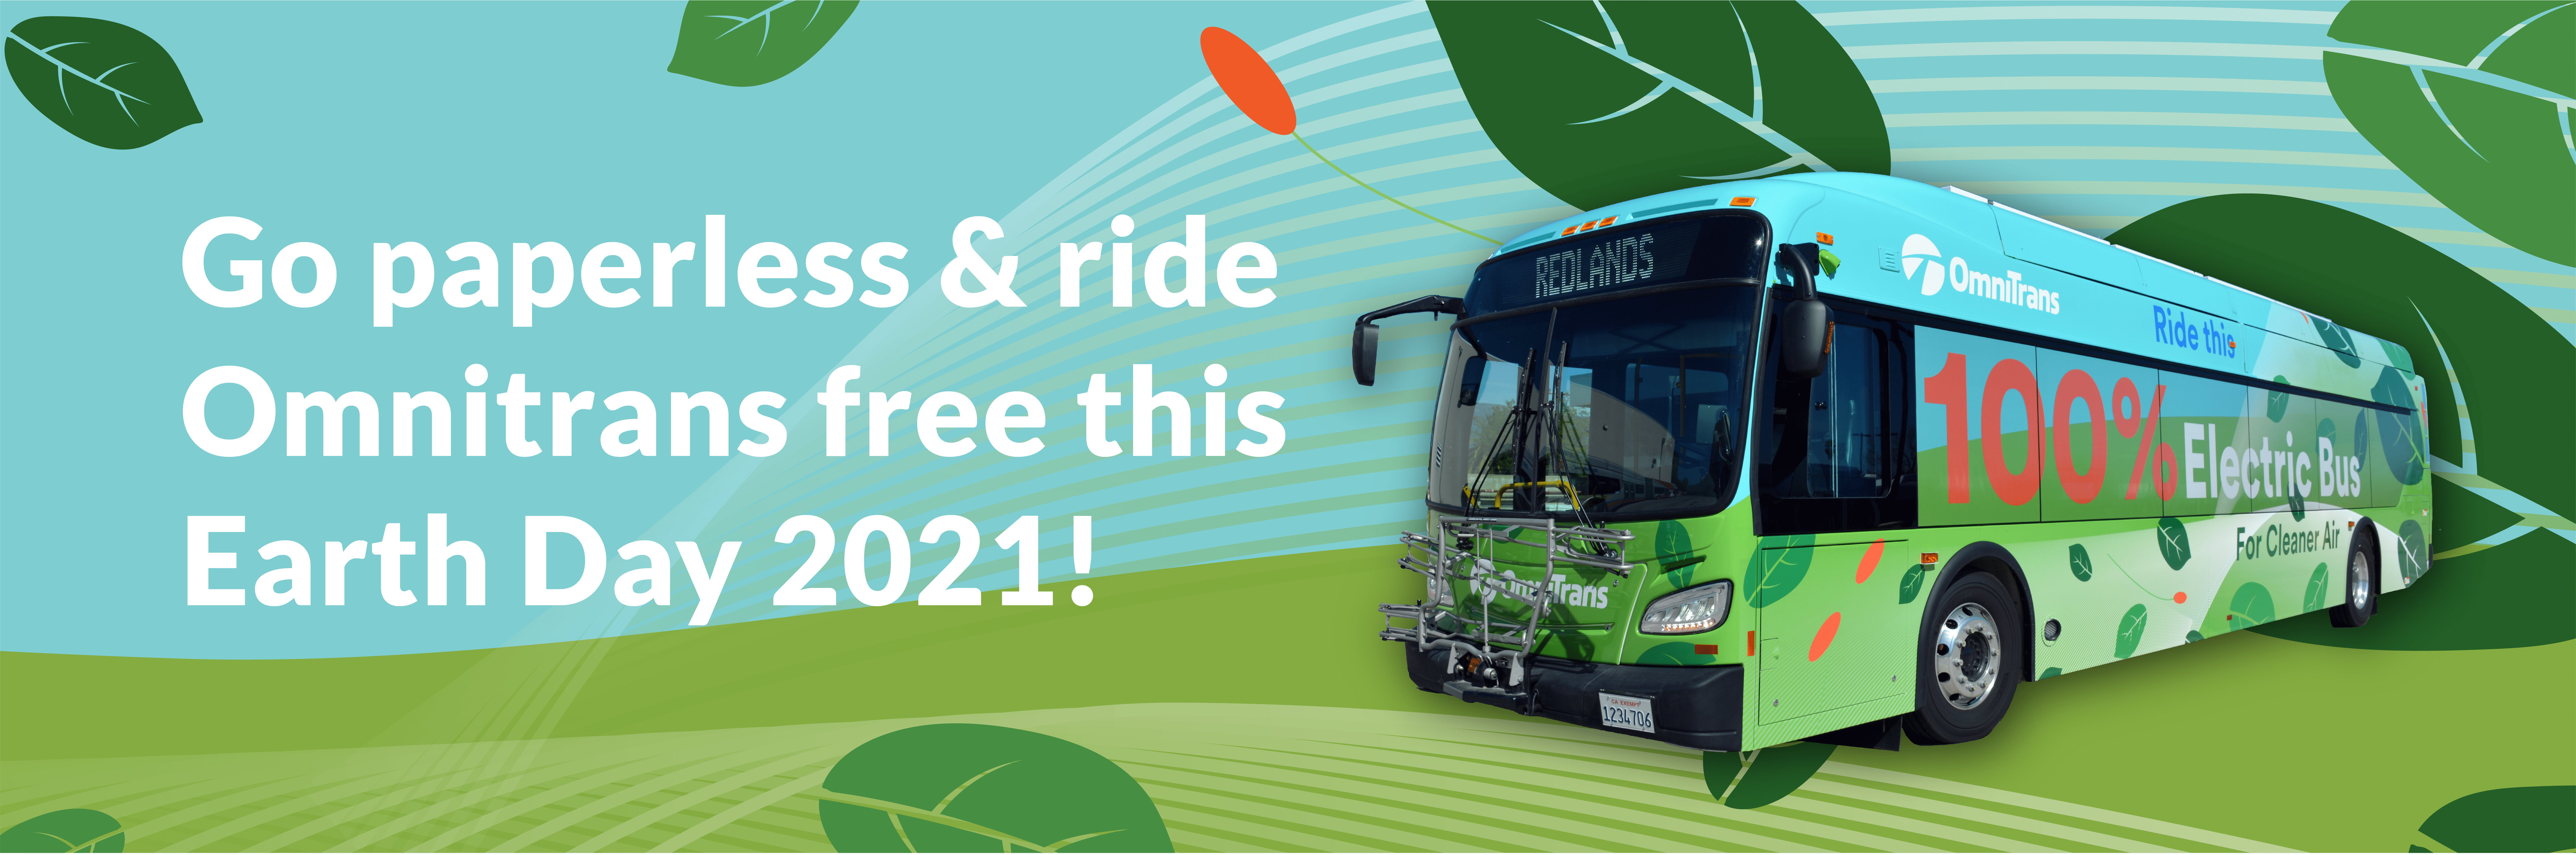 Ride Omnitrans Free with Mobile Fares to Celebrate Earth Day 2021!